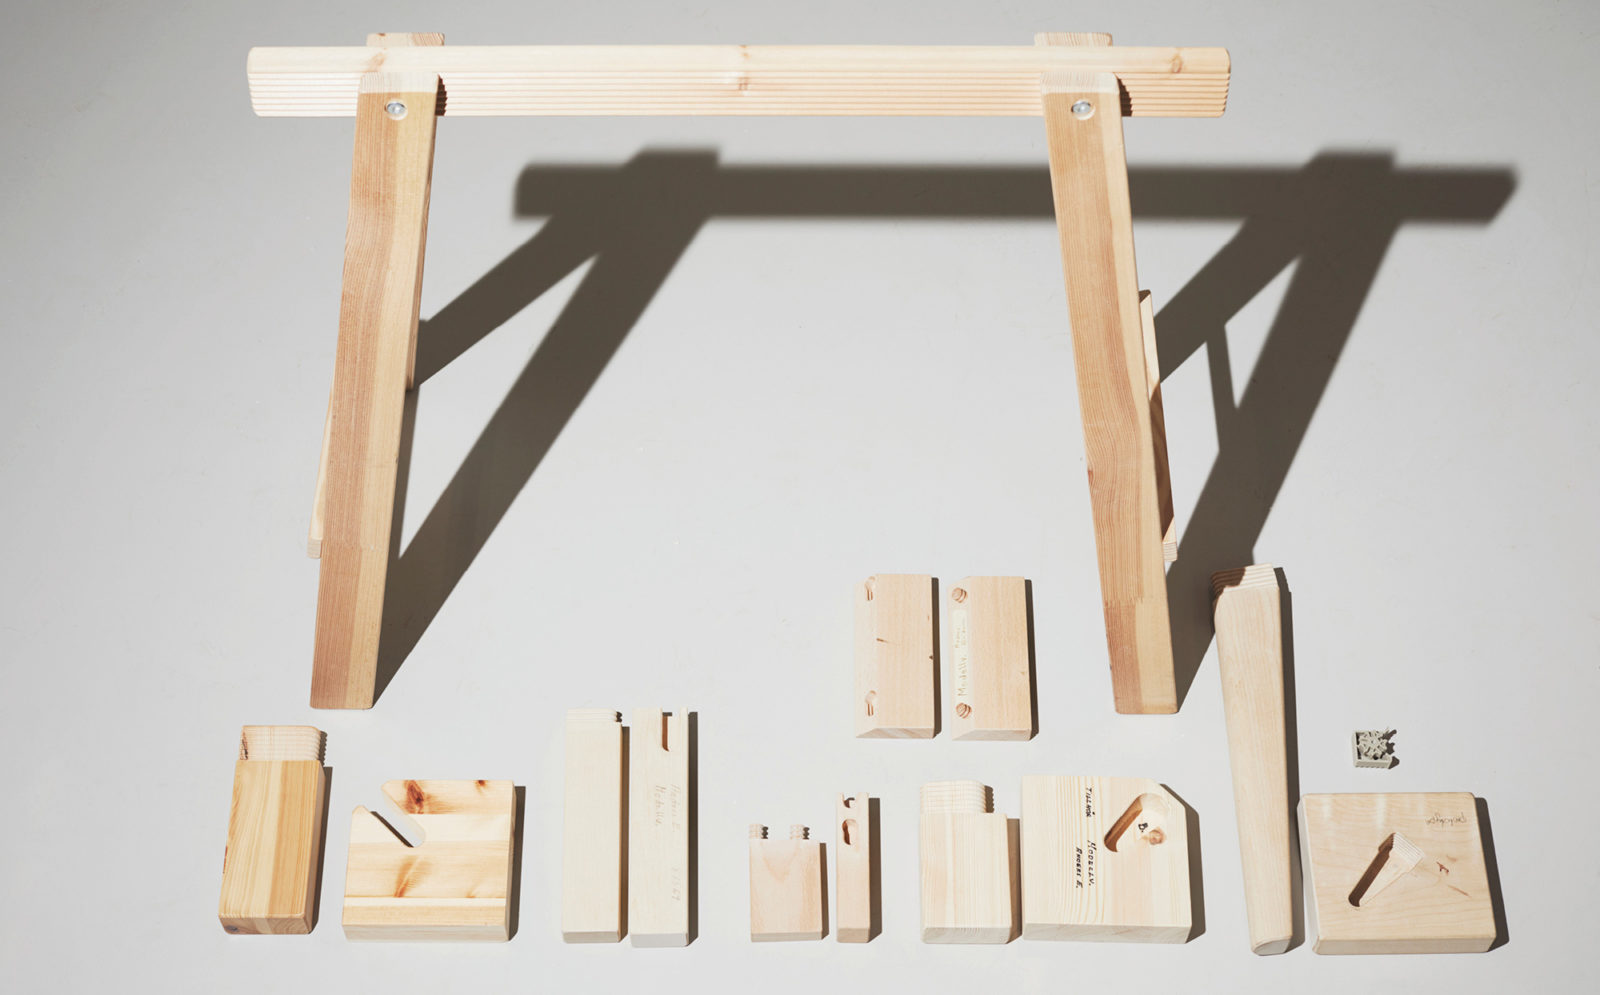 A wooden trestle and several differently shaped parts, wooden prototypes, laid out on the floor.